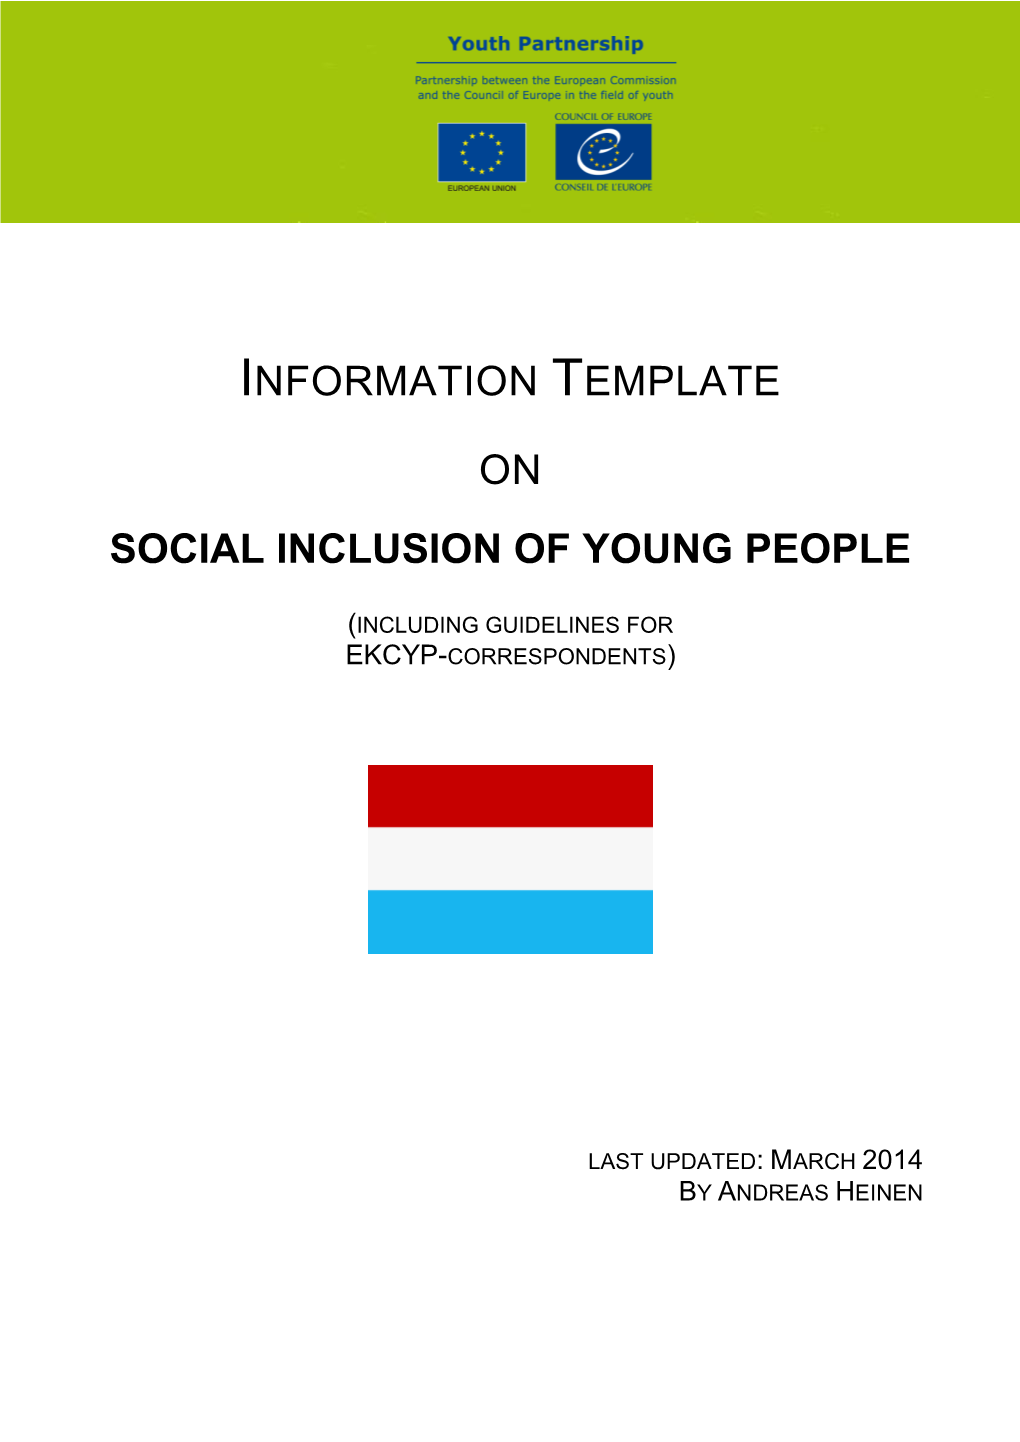 Social Inclusion of Young People